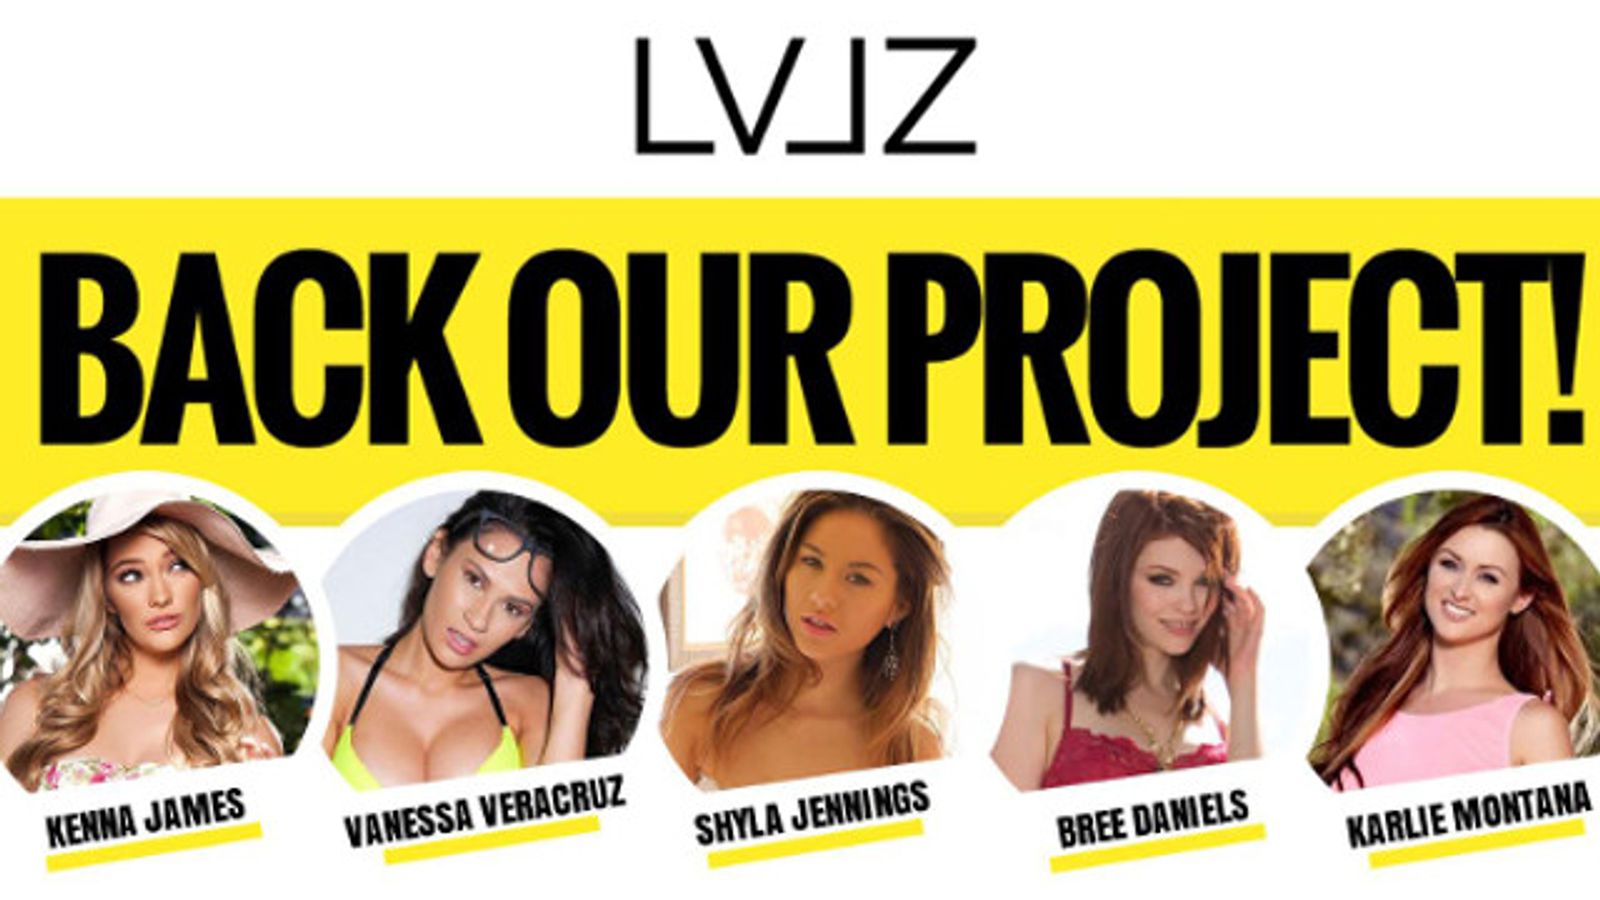 LVLZ Platform Launches With Five Top Performers